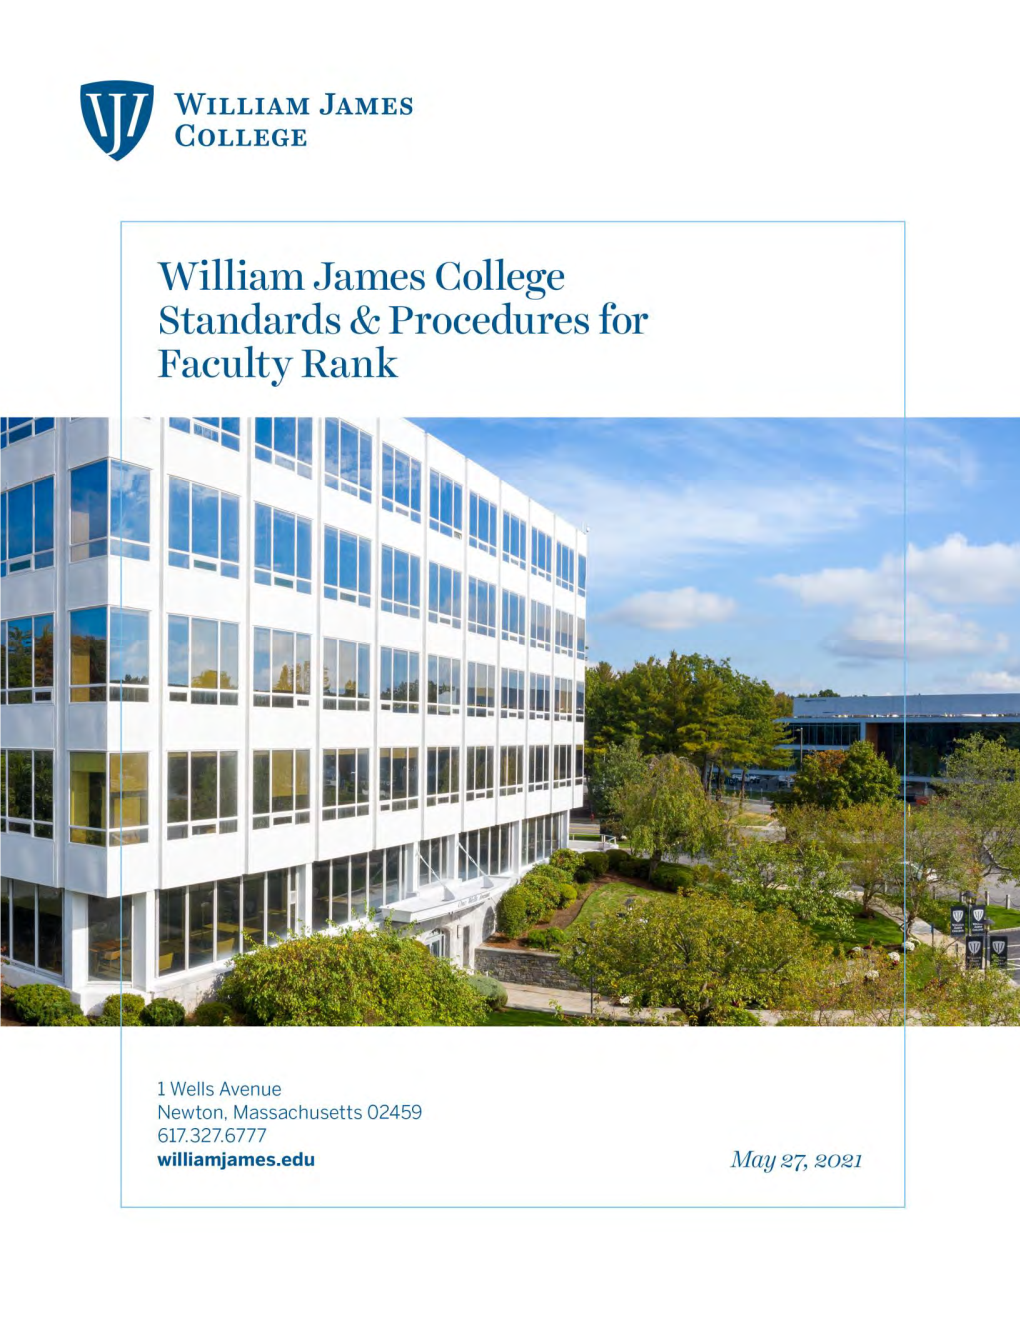 WJC Standards and Procedures for Faculty Rank (Rev. May 27, 2021)